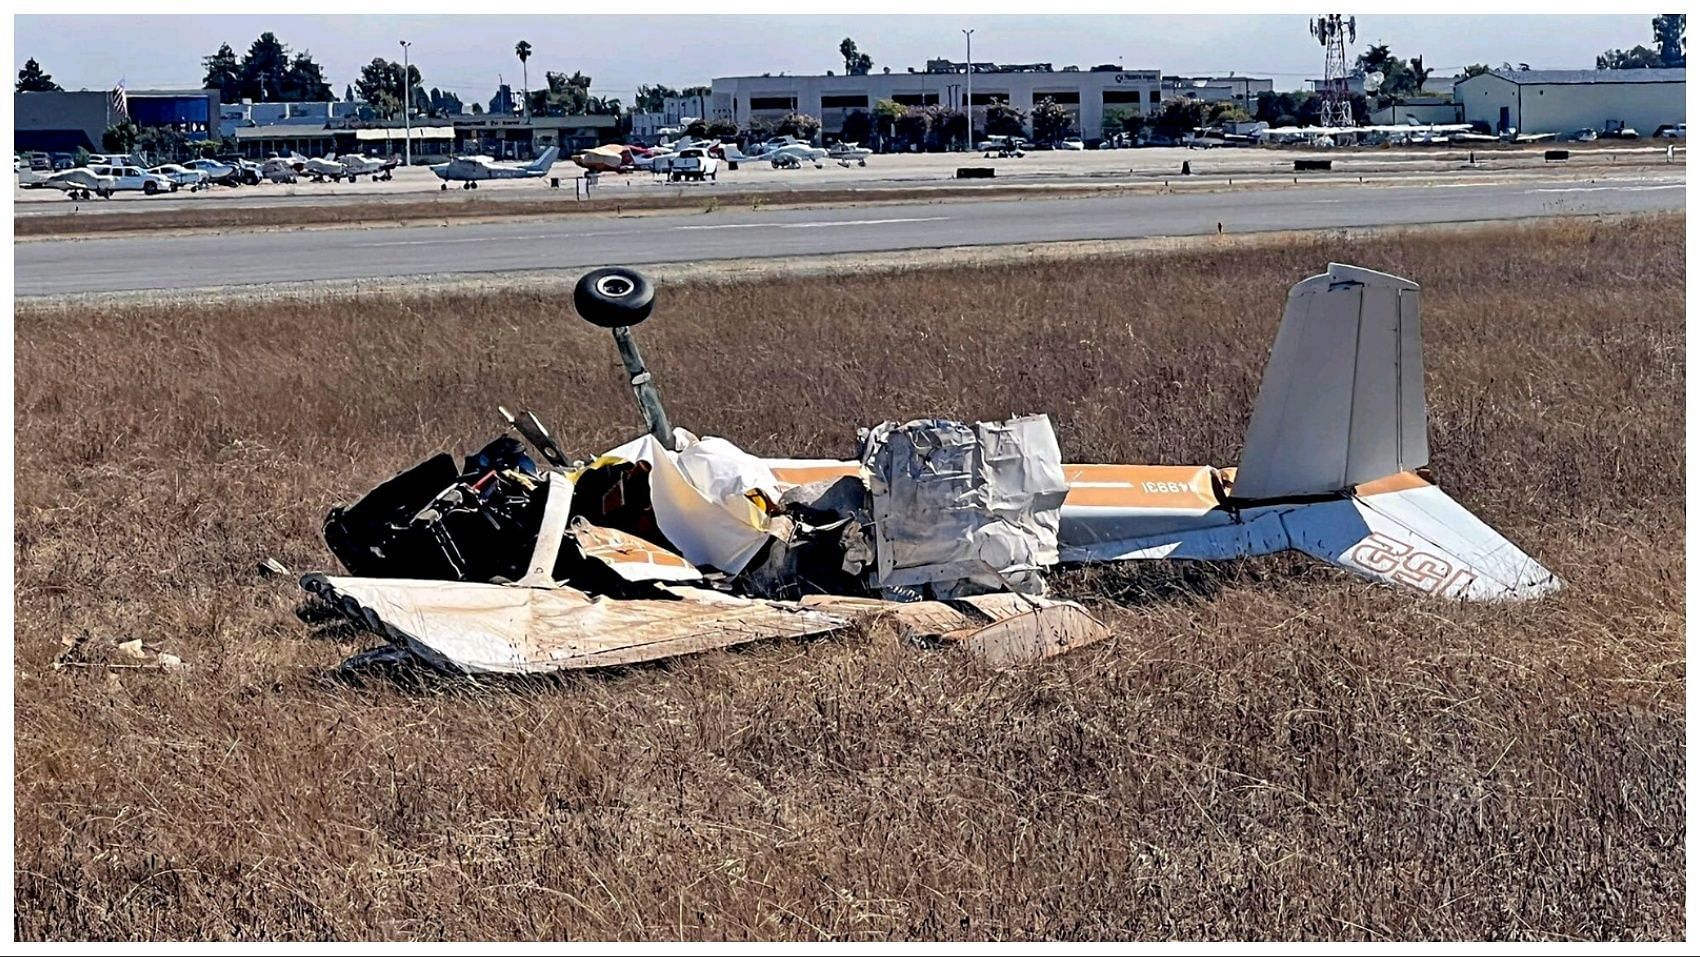 On Thursday, two planes attempting to land collided over Watsonville Municipal Airport in California.(Image via Getty Images)